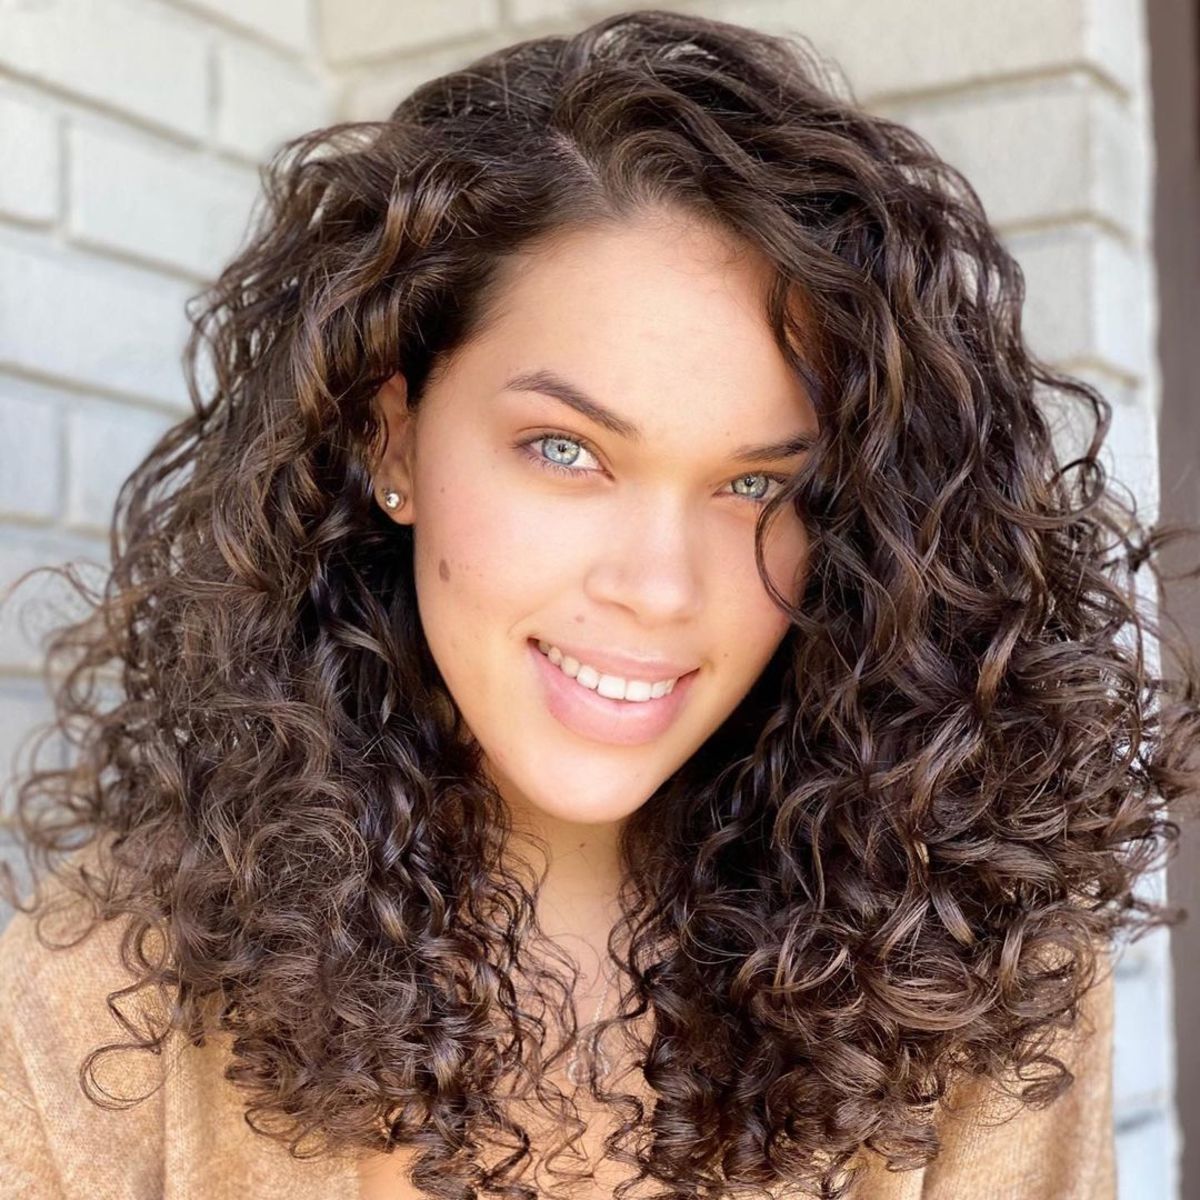 66 Best Shoulder Length Curly Hair Cuts & Styles in 2023